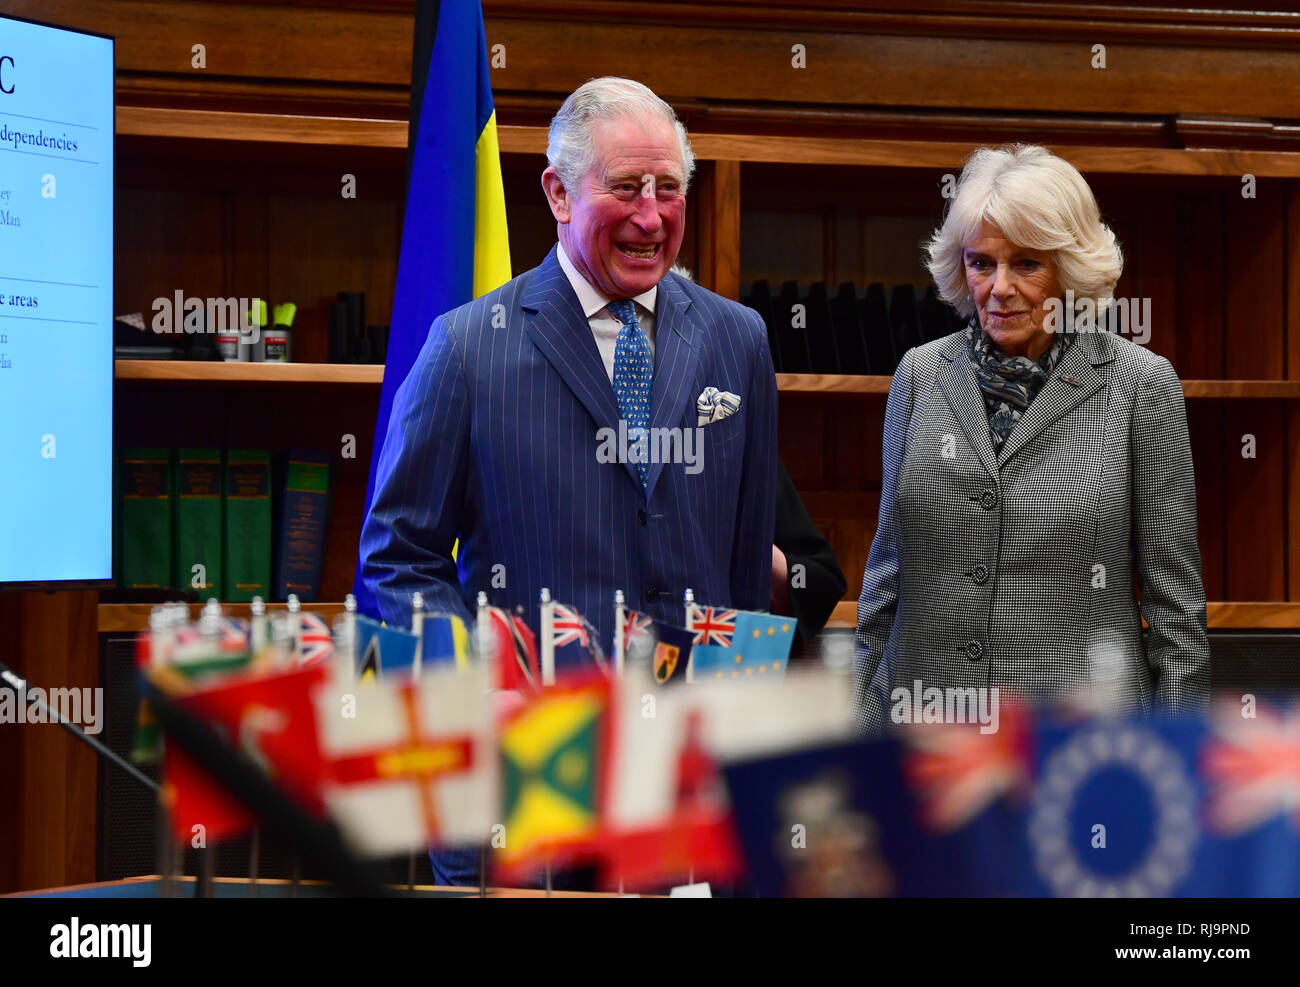 The Prince of Wales and the Duchess of Cornwall during a visit to The Supreme Court of the United Kingdom in Parliament Square, London, to commemorate its 10th anniversary. Stock Photo